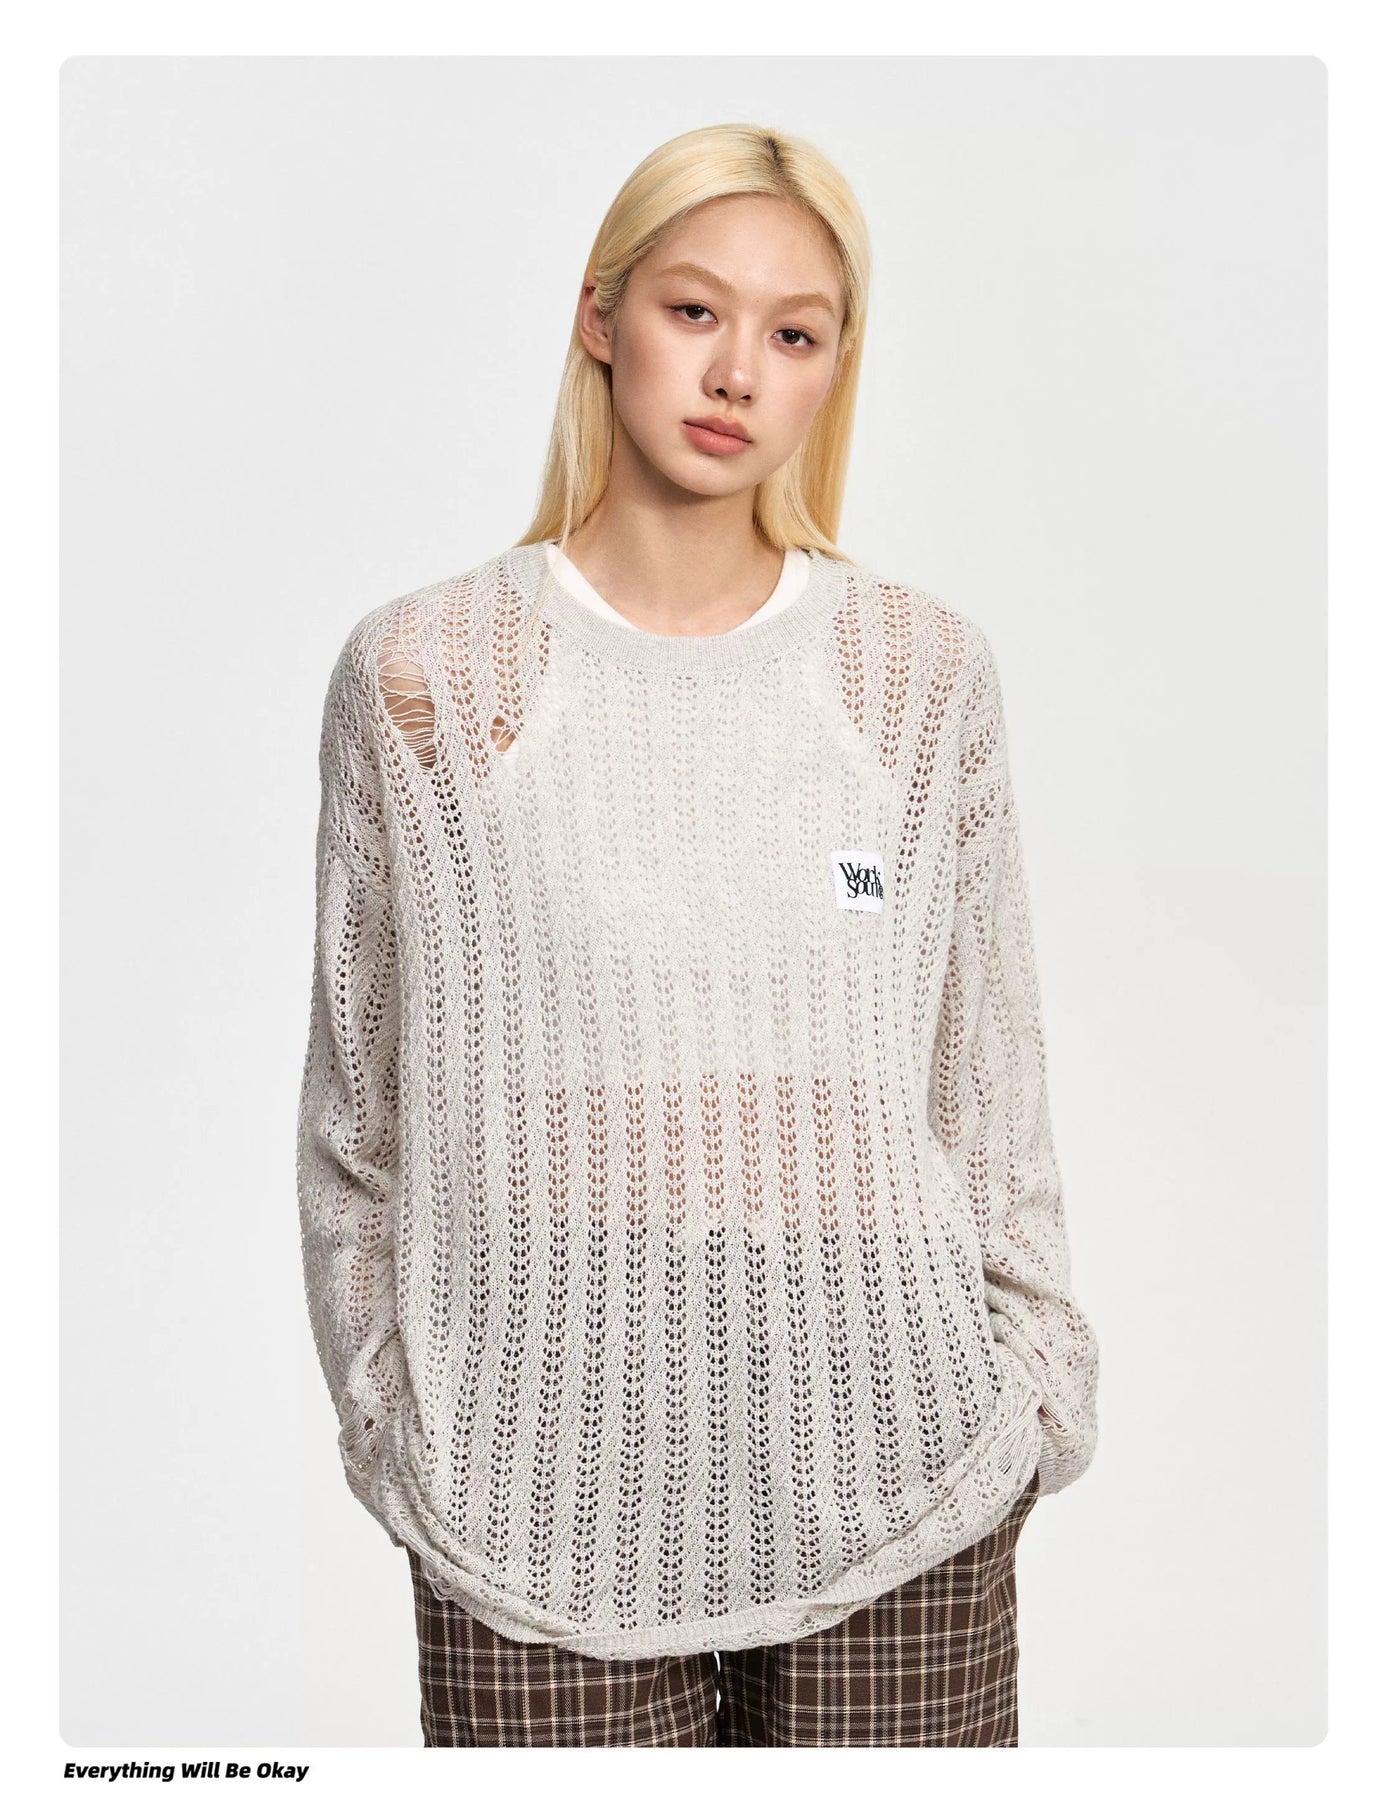 Patterned and Mesh Sweater Korean Street Fashion Sweater By WORKSOUT Shop Online at OH Vault